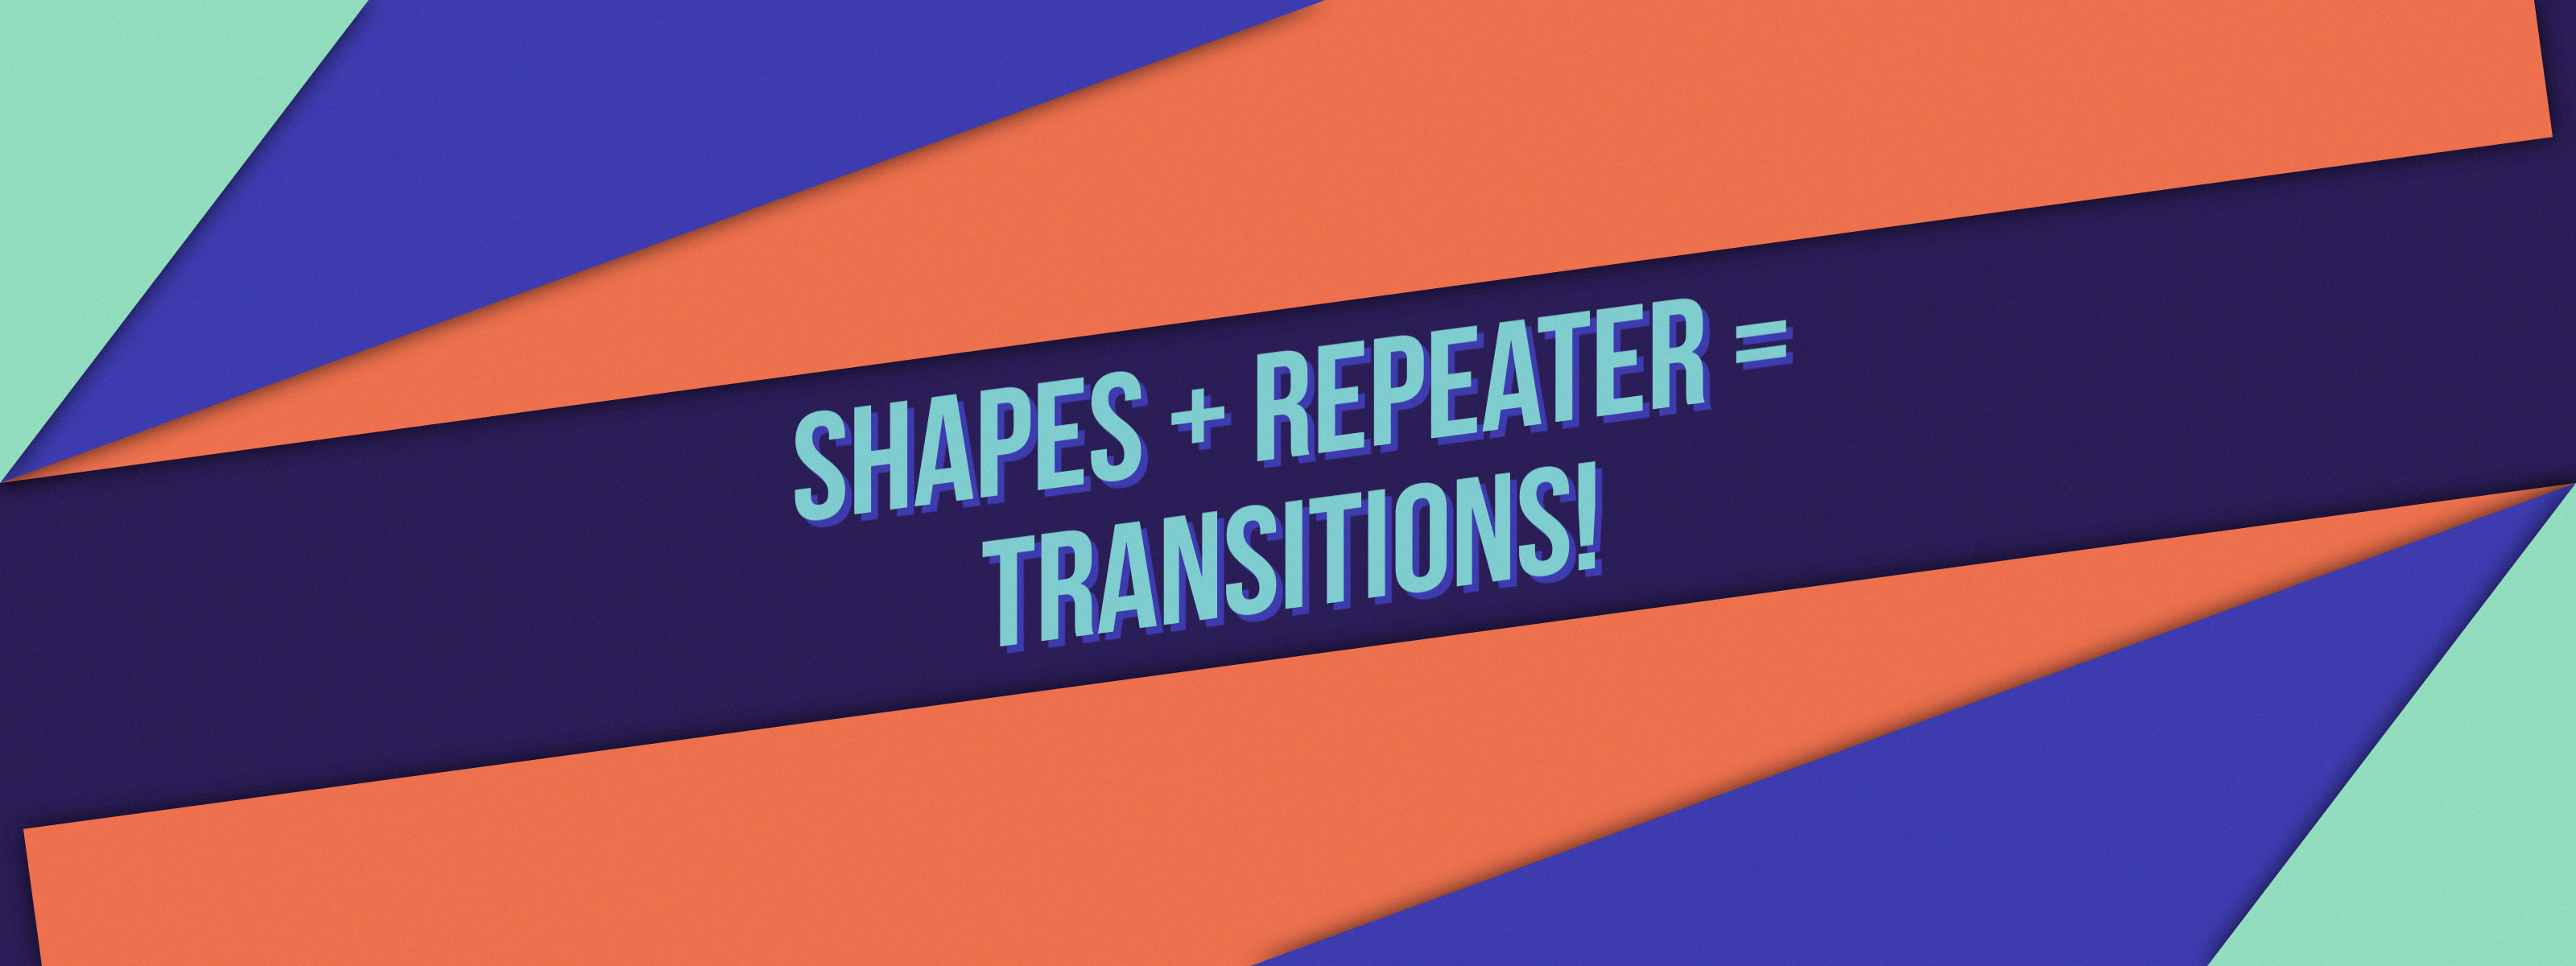 gumroad after effects transitions